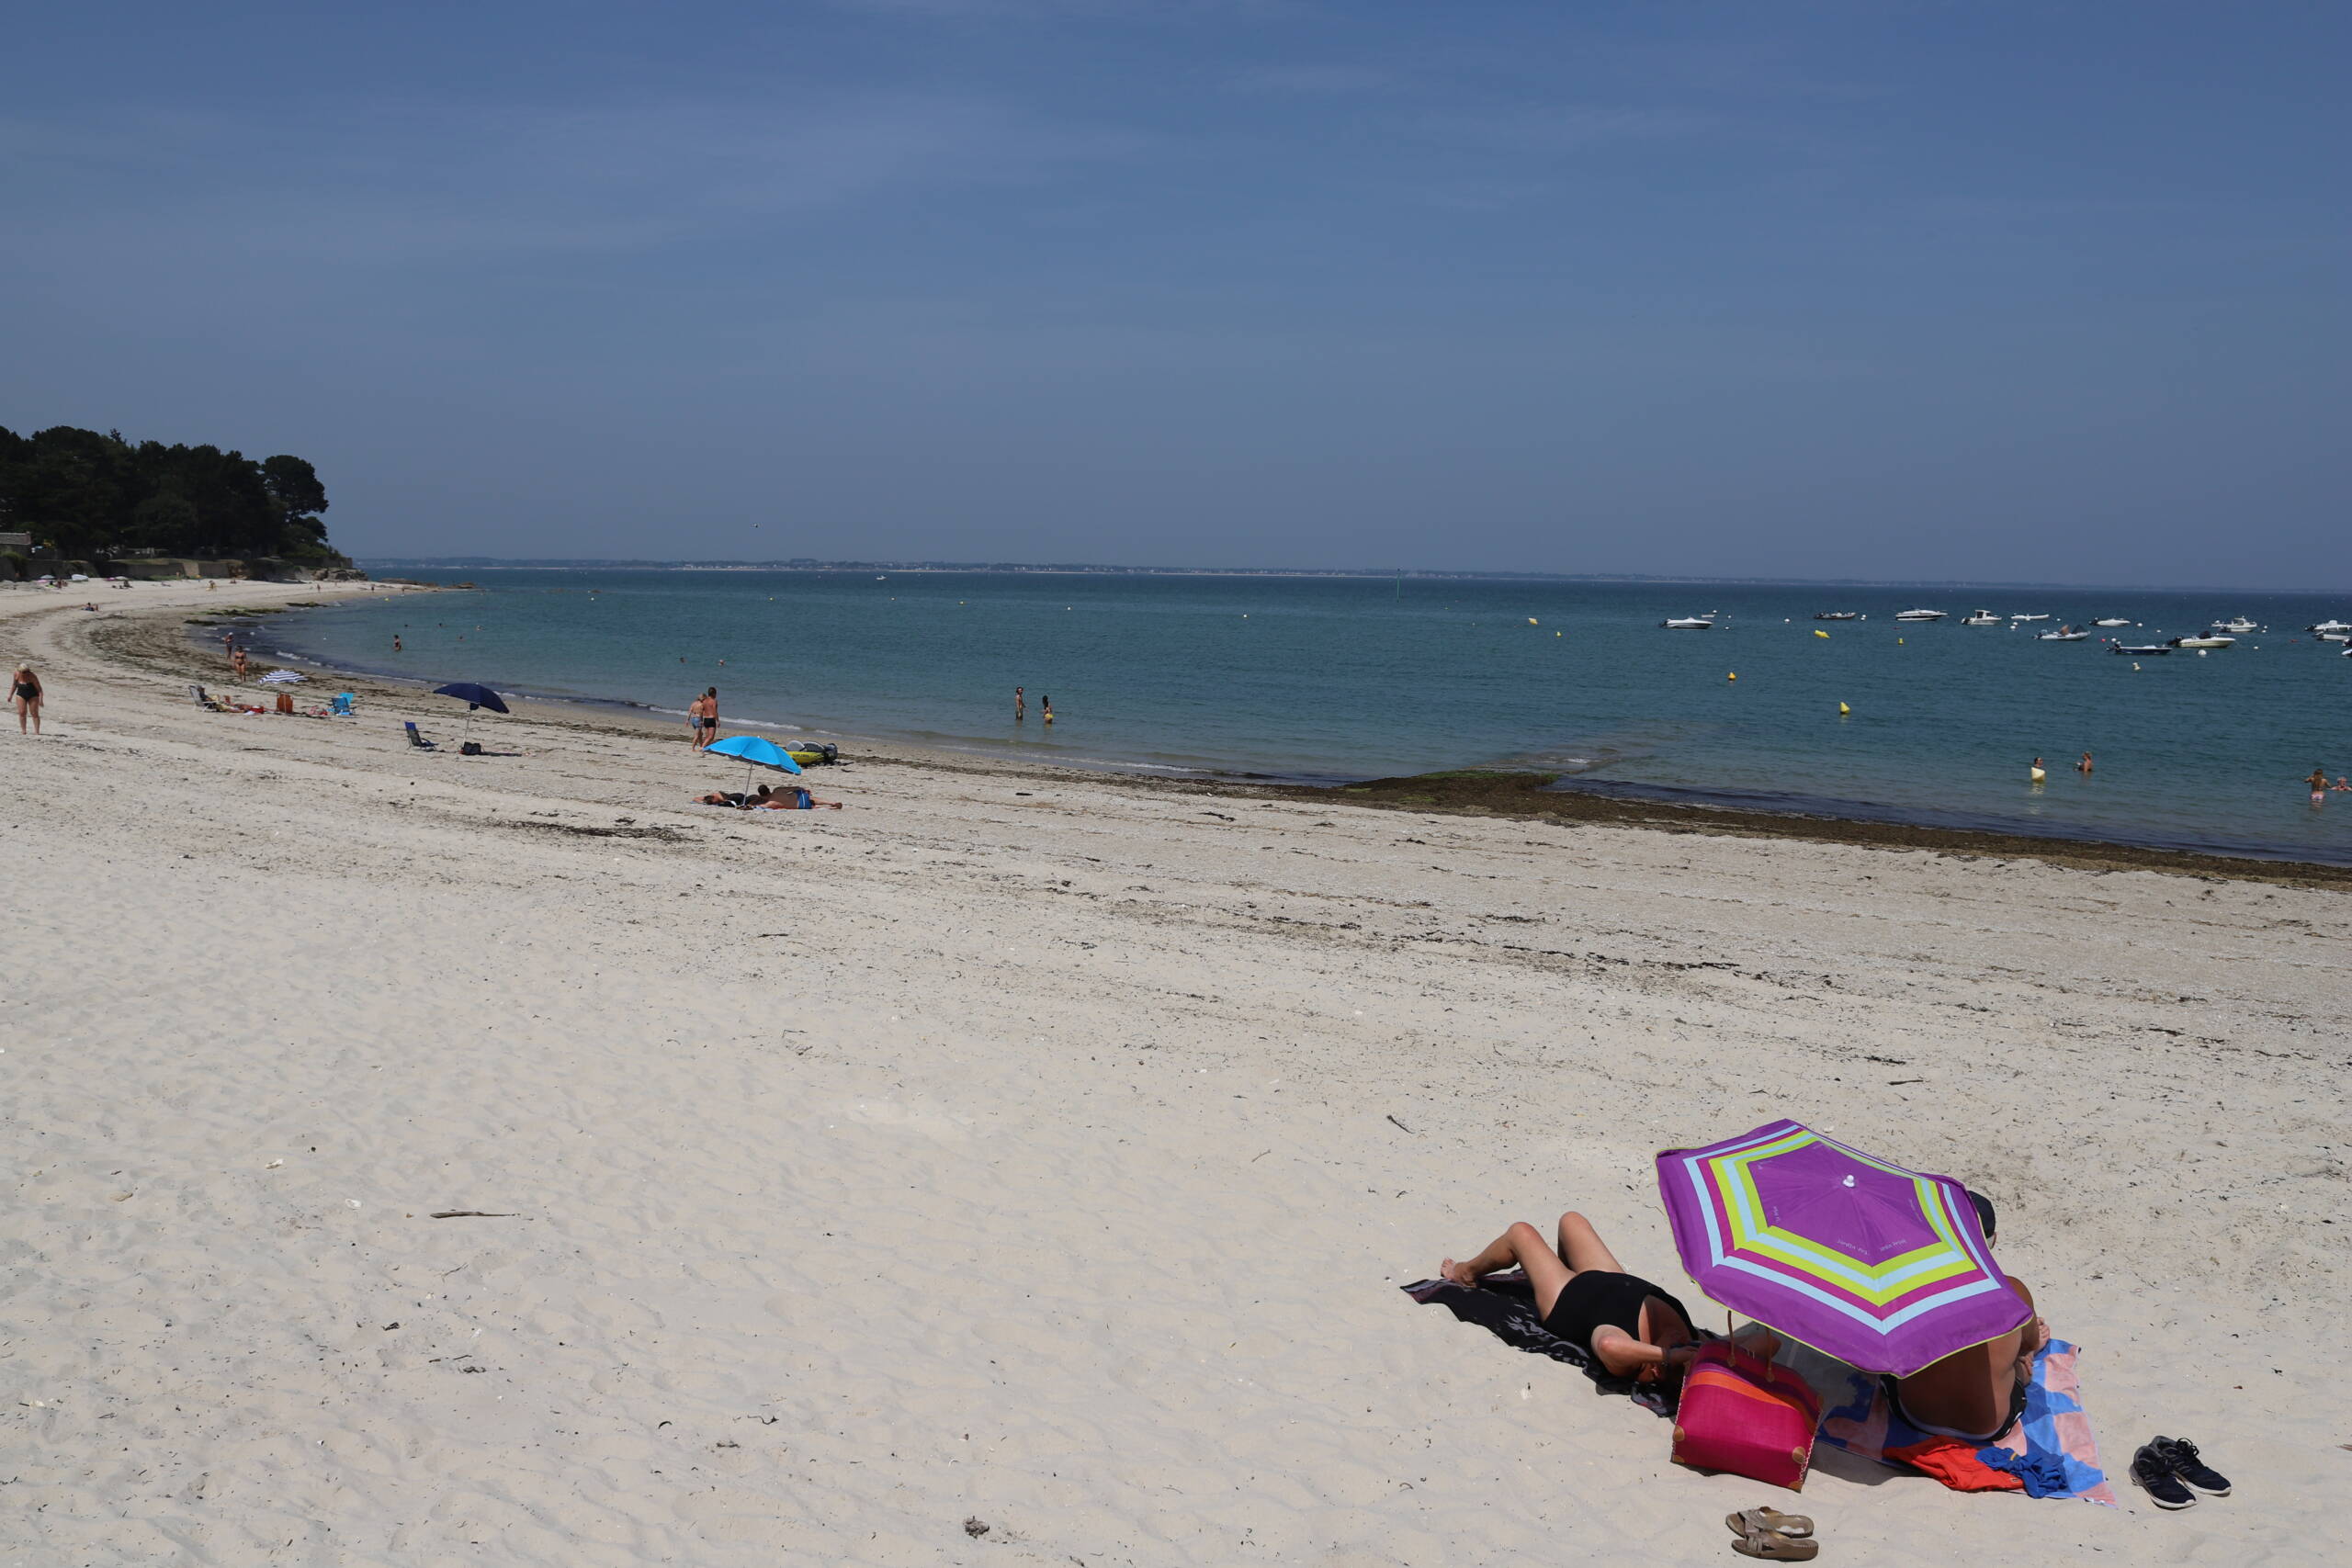 A Tranquil Summer Day at the Bretagne Seaside: Serenity and Sunshine